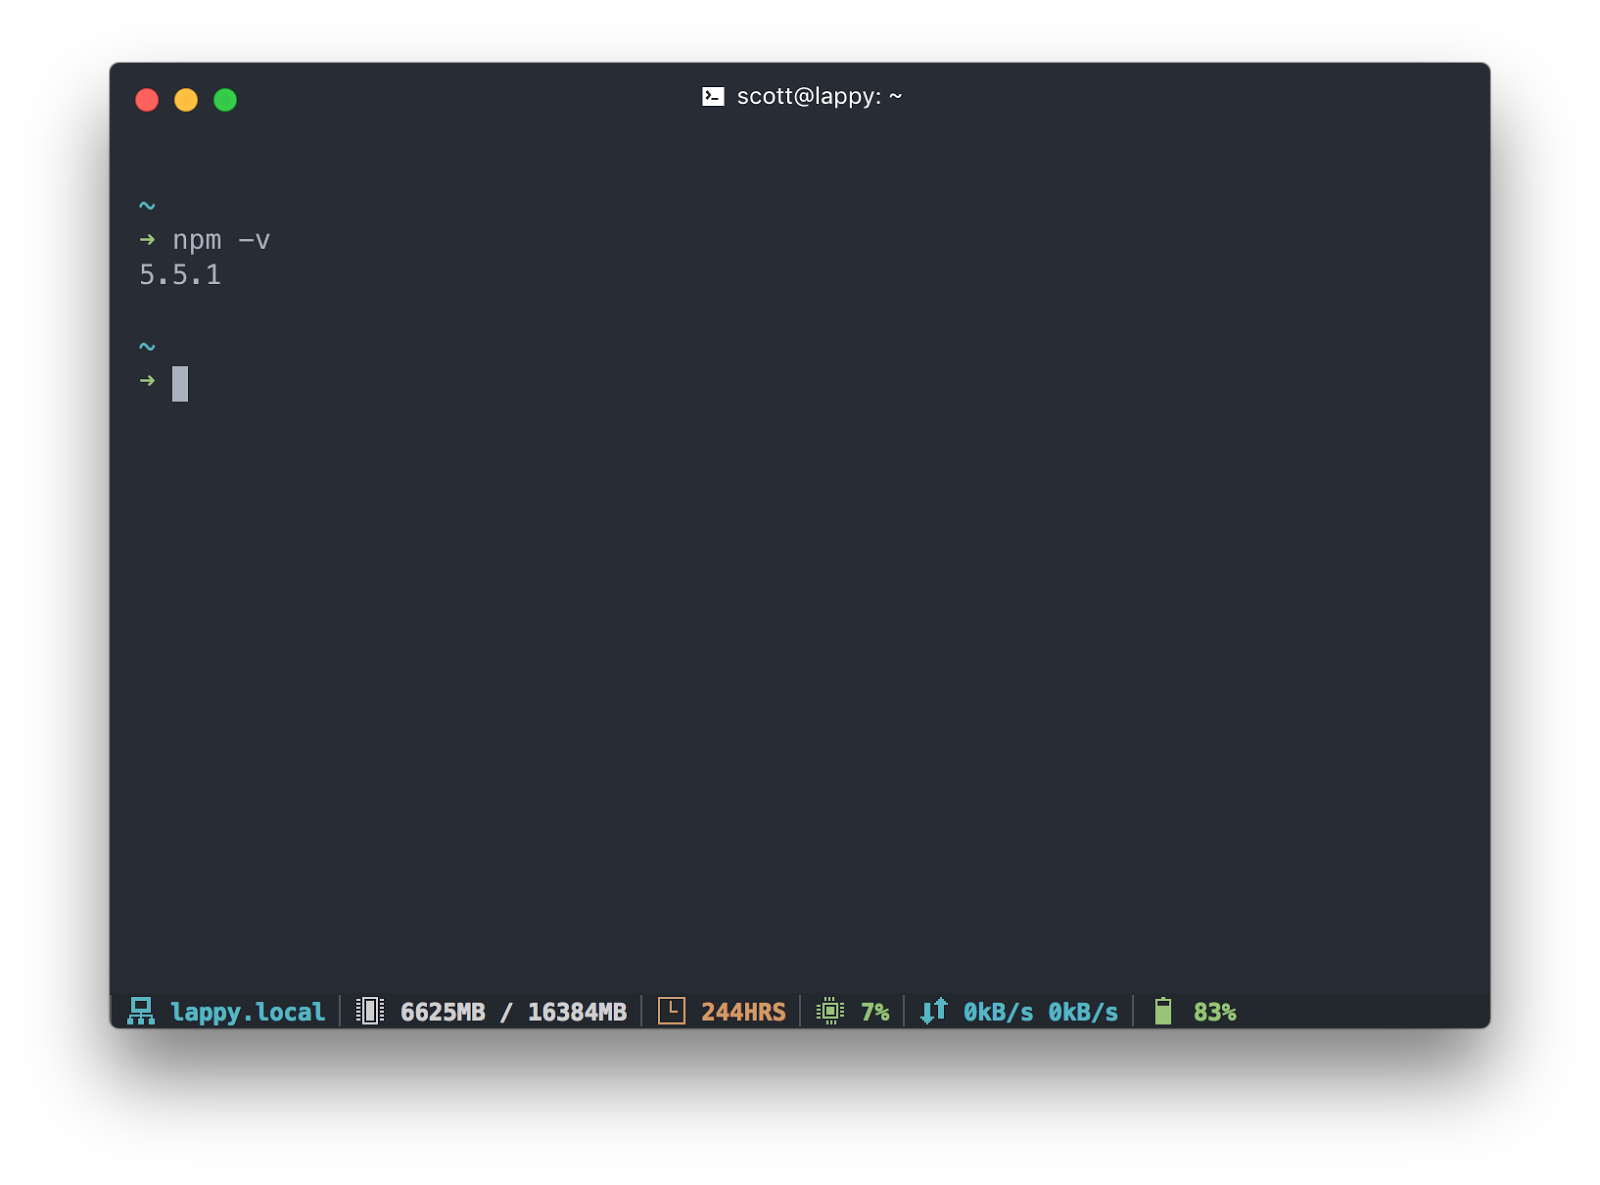 Screenshot of my Terminal application, Hyper Terminal, displaying the output of the "npm -v" command. The resulting text displays, "5.5.1"